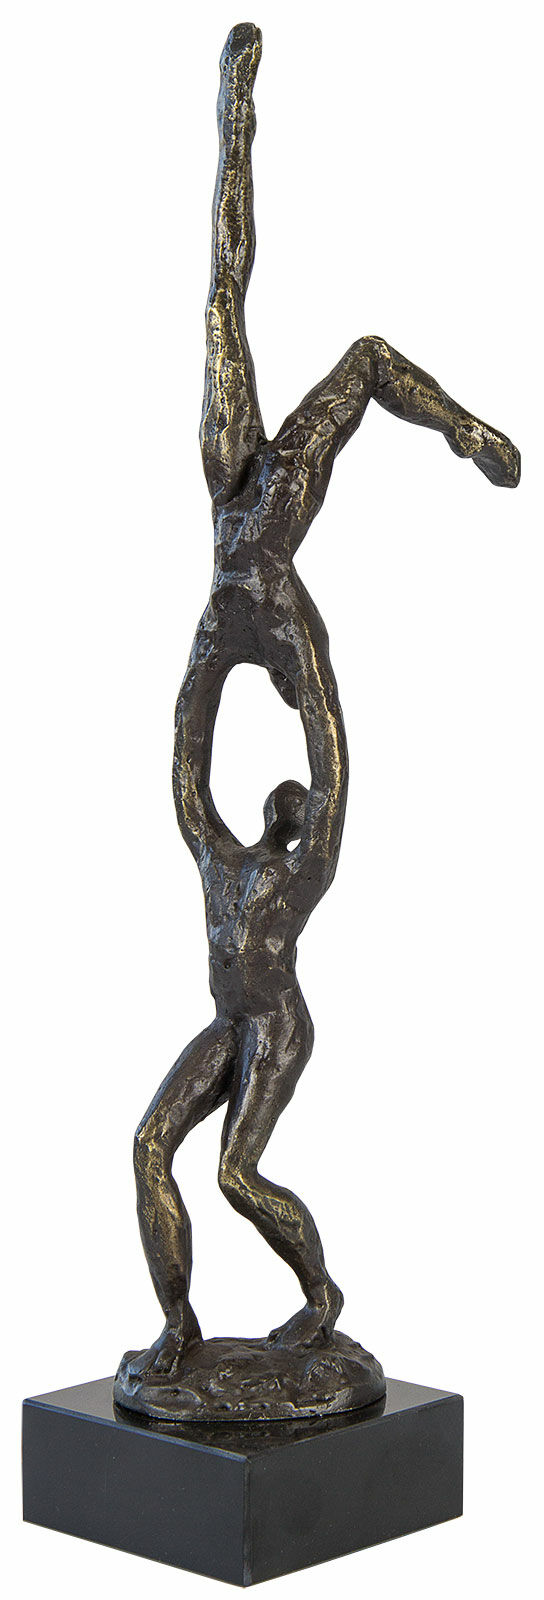 Sculpture "Showing Strength" by Gerard